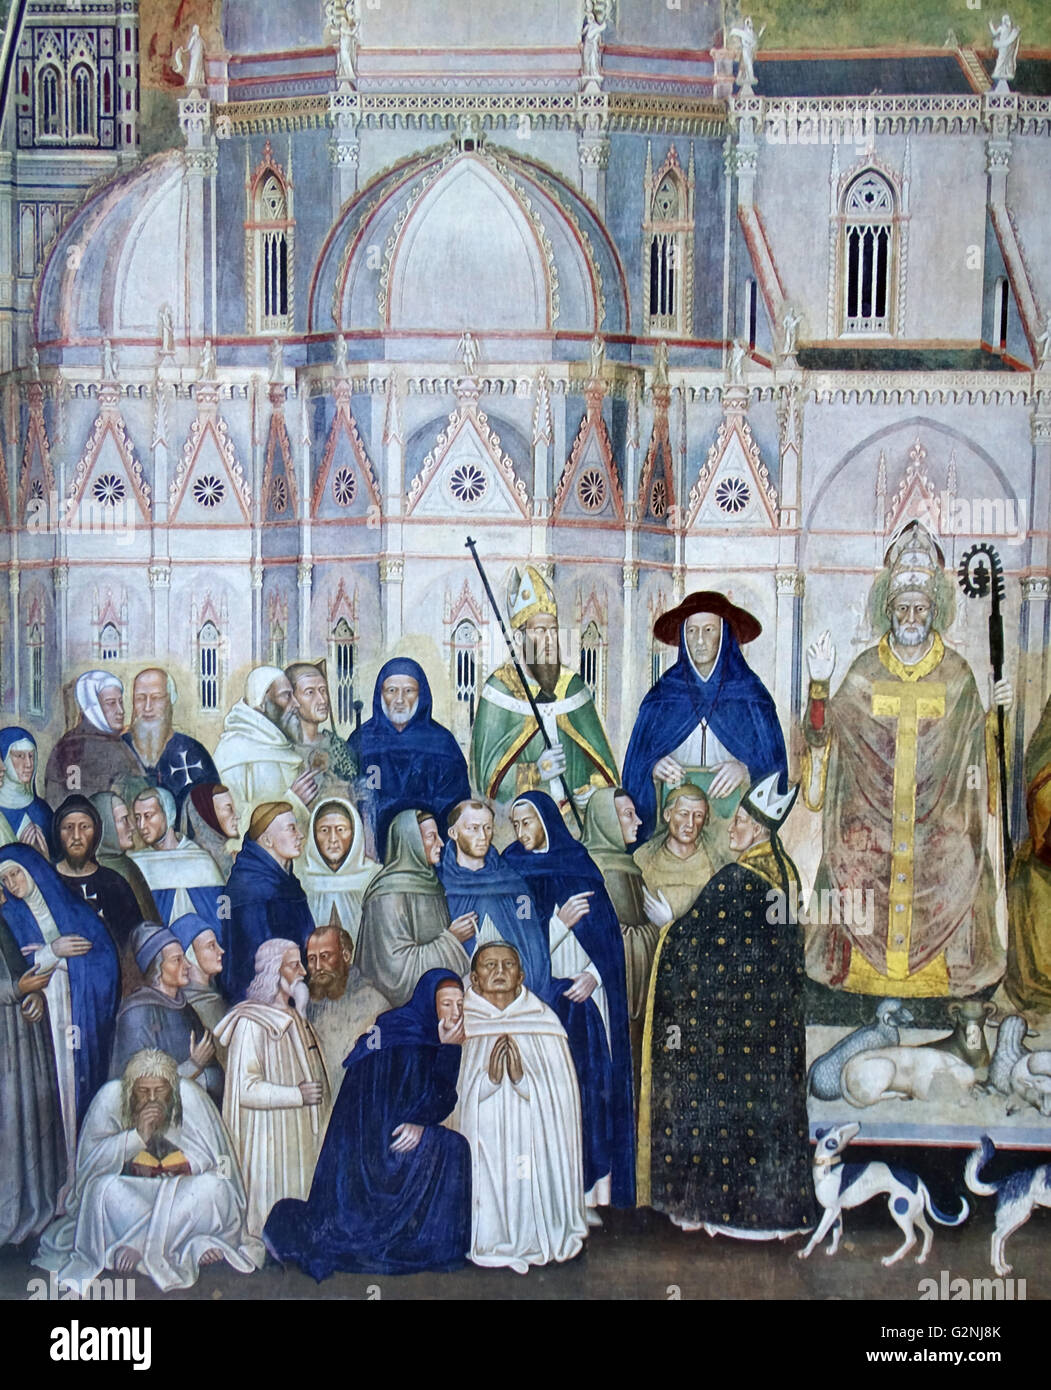 Fresco depicting the Dominican Order painted by the Italian artist Andrea da Firenze. The painting depicts the hierarchy of power in the Church. Fresco is located in the Spanish Chapel, Florence. Dated 13th Century Stock Photo